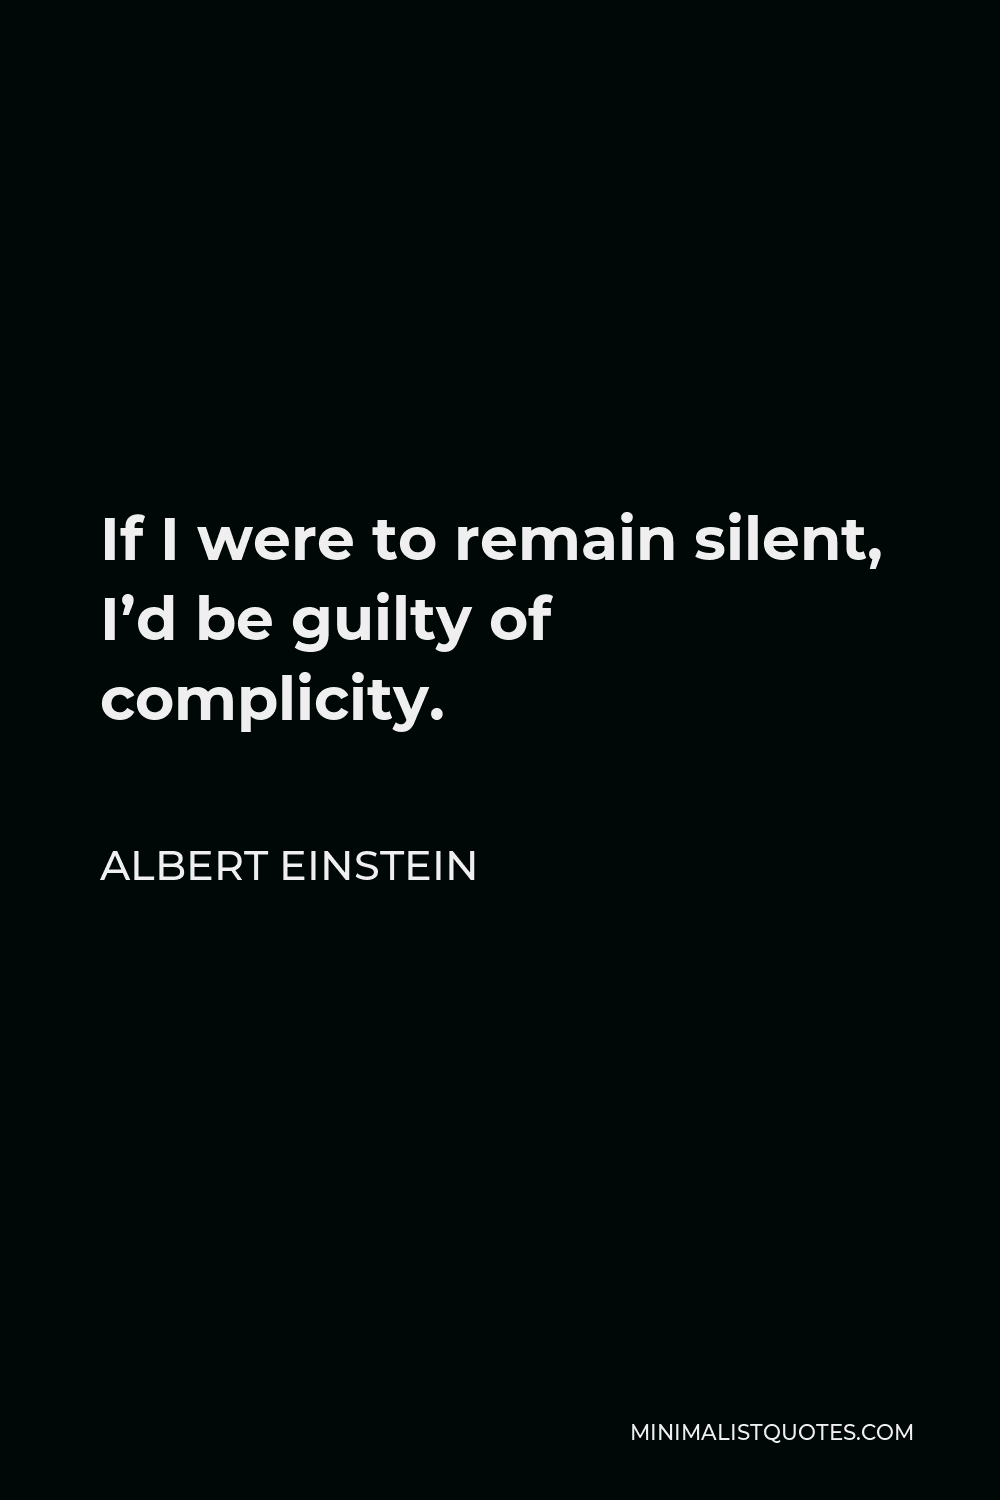 Albert Einstein Quote - If I were to remain silent, I’d be guilty of complicity.